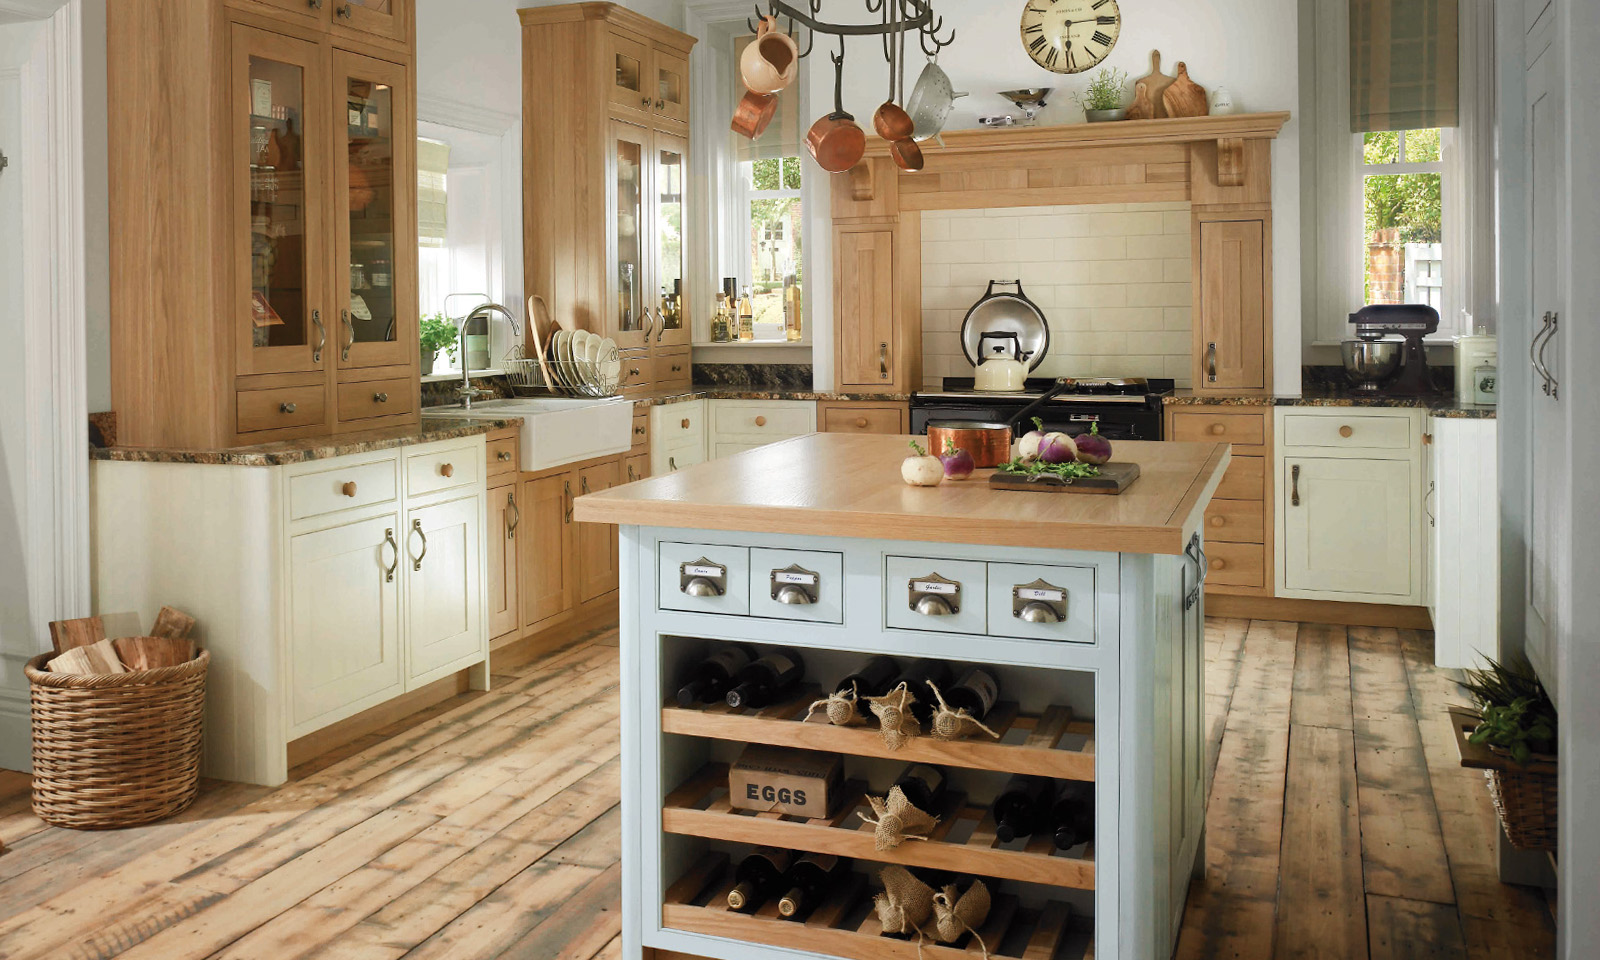 Pluckley. A bespoke, handmade, hand-painted in-frame kitchen, designed for a large socially active family. Another hand-crafted kitchen manufactured by the skilled cabinet makers at Mounts Hill Woodcraft.